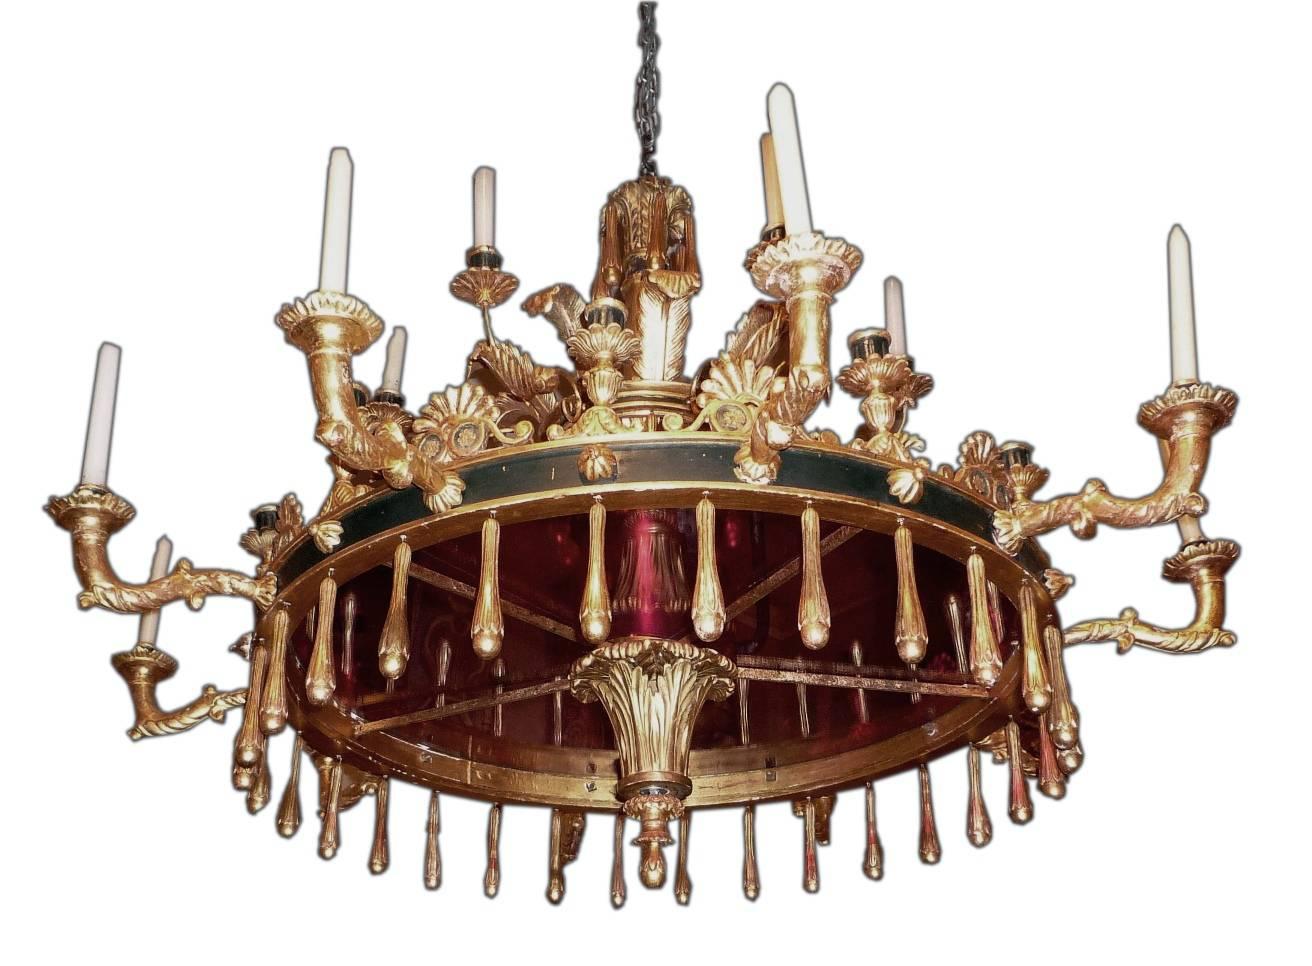 A fine and unusual Italian, Neapolitan neoclassical gilt and painted wood chandelier, with twenty-six-lights, circa 1815-1820.